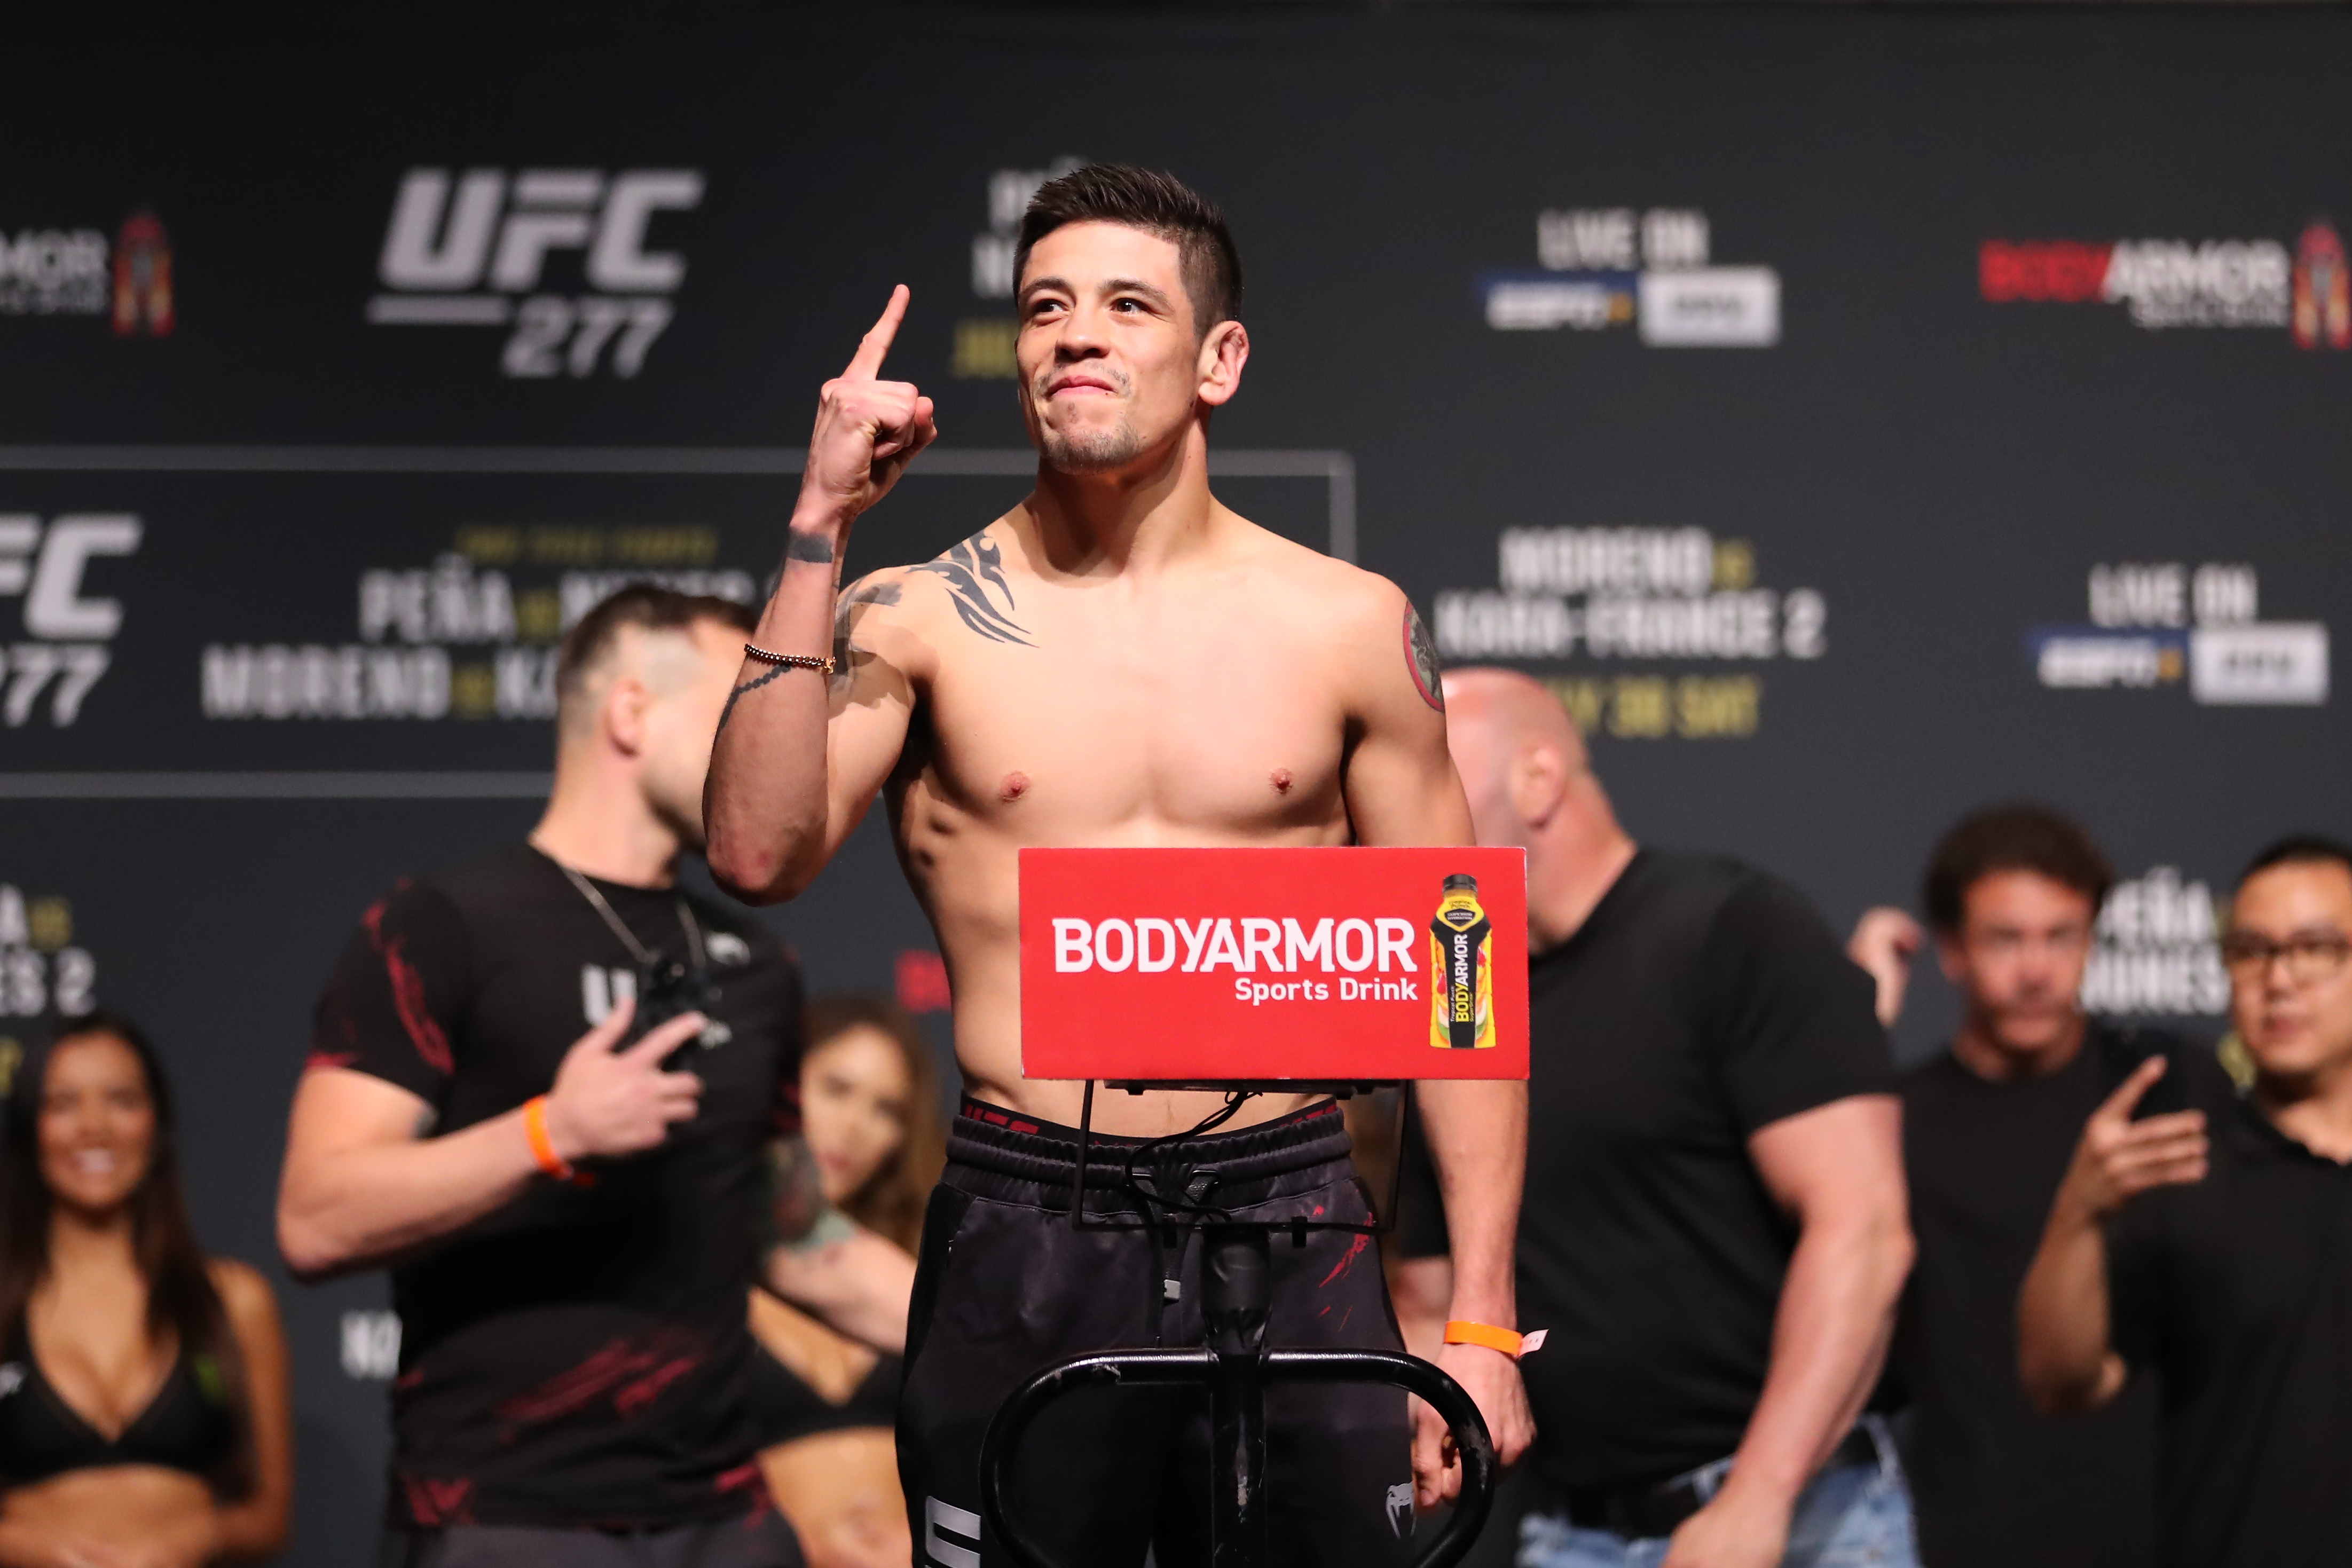 Brandon Moreno steps on the scale for the ceremonial weigh-in for the UFC 277 ceremonial weigh-ins on July 29, 2022, at the American Airlines Center in Dallas, TX.